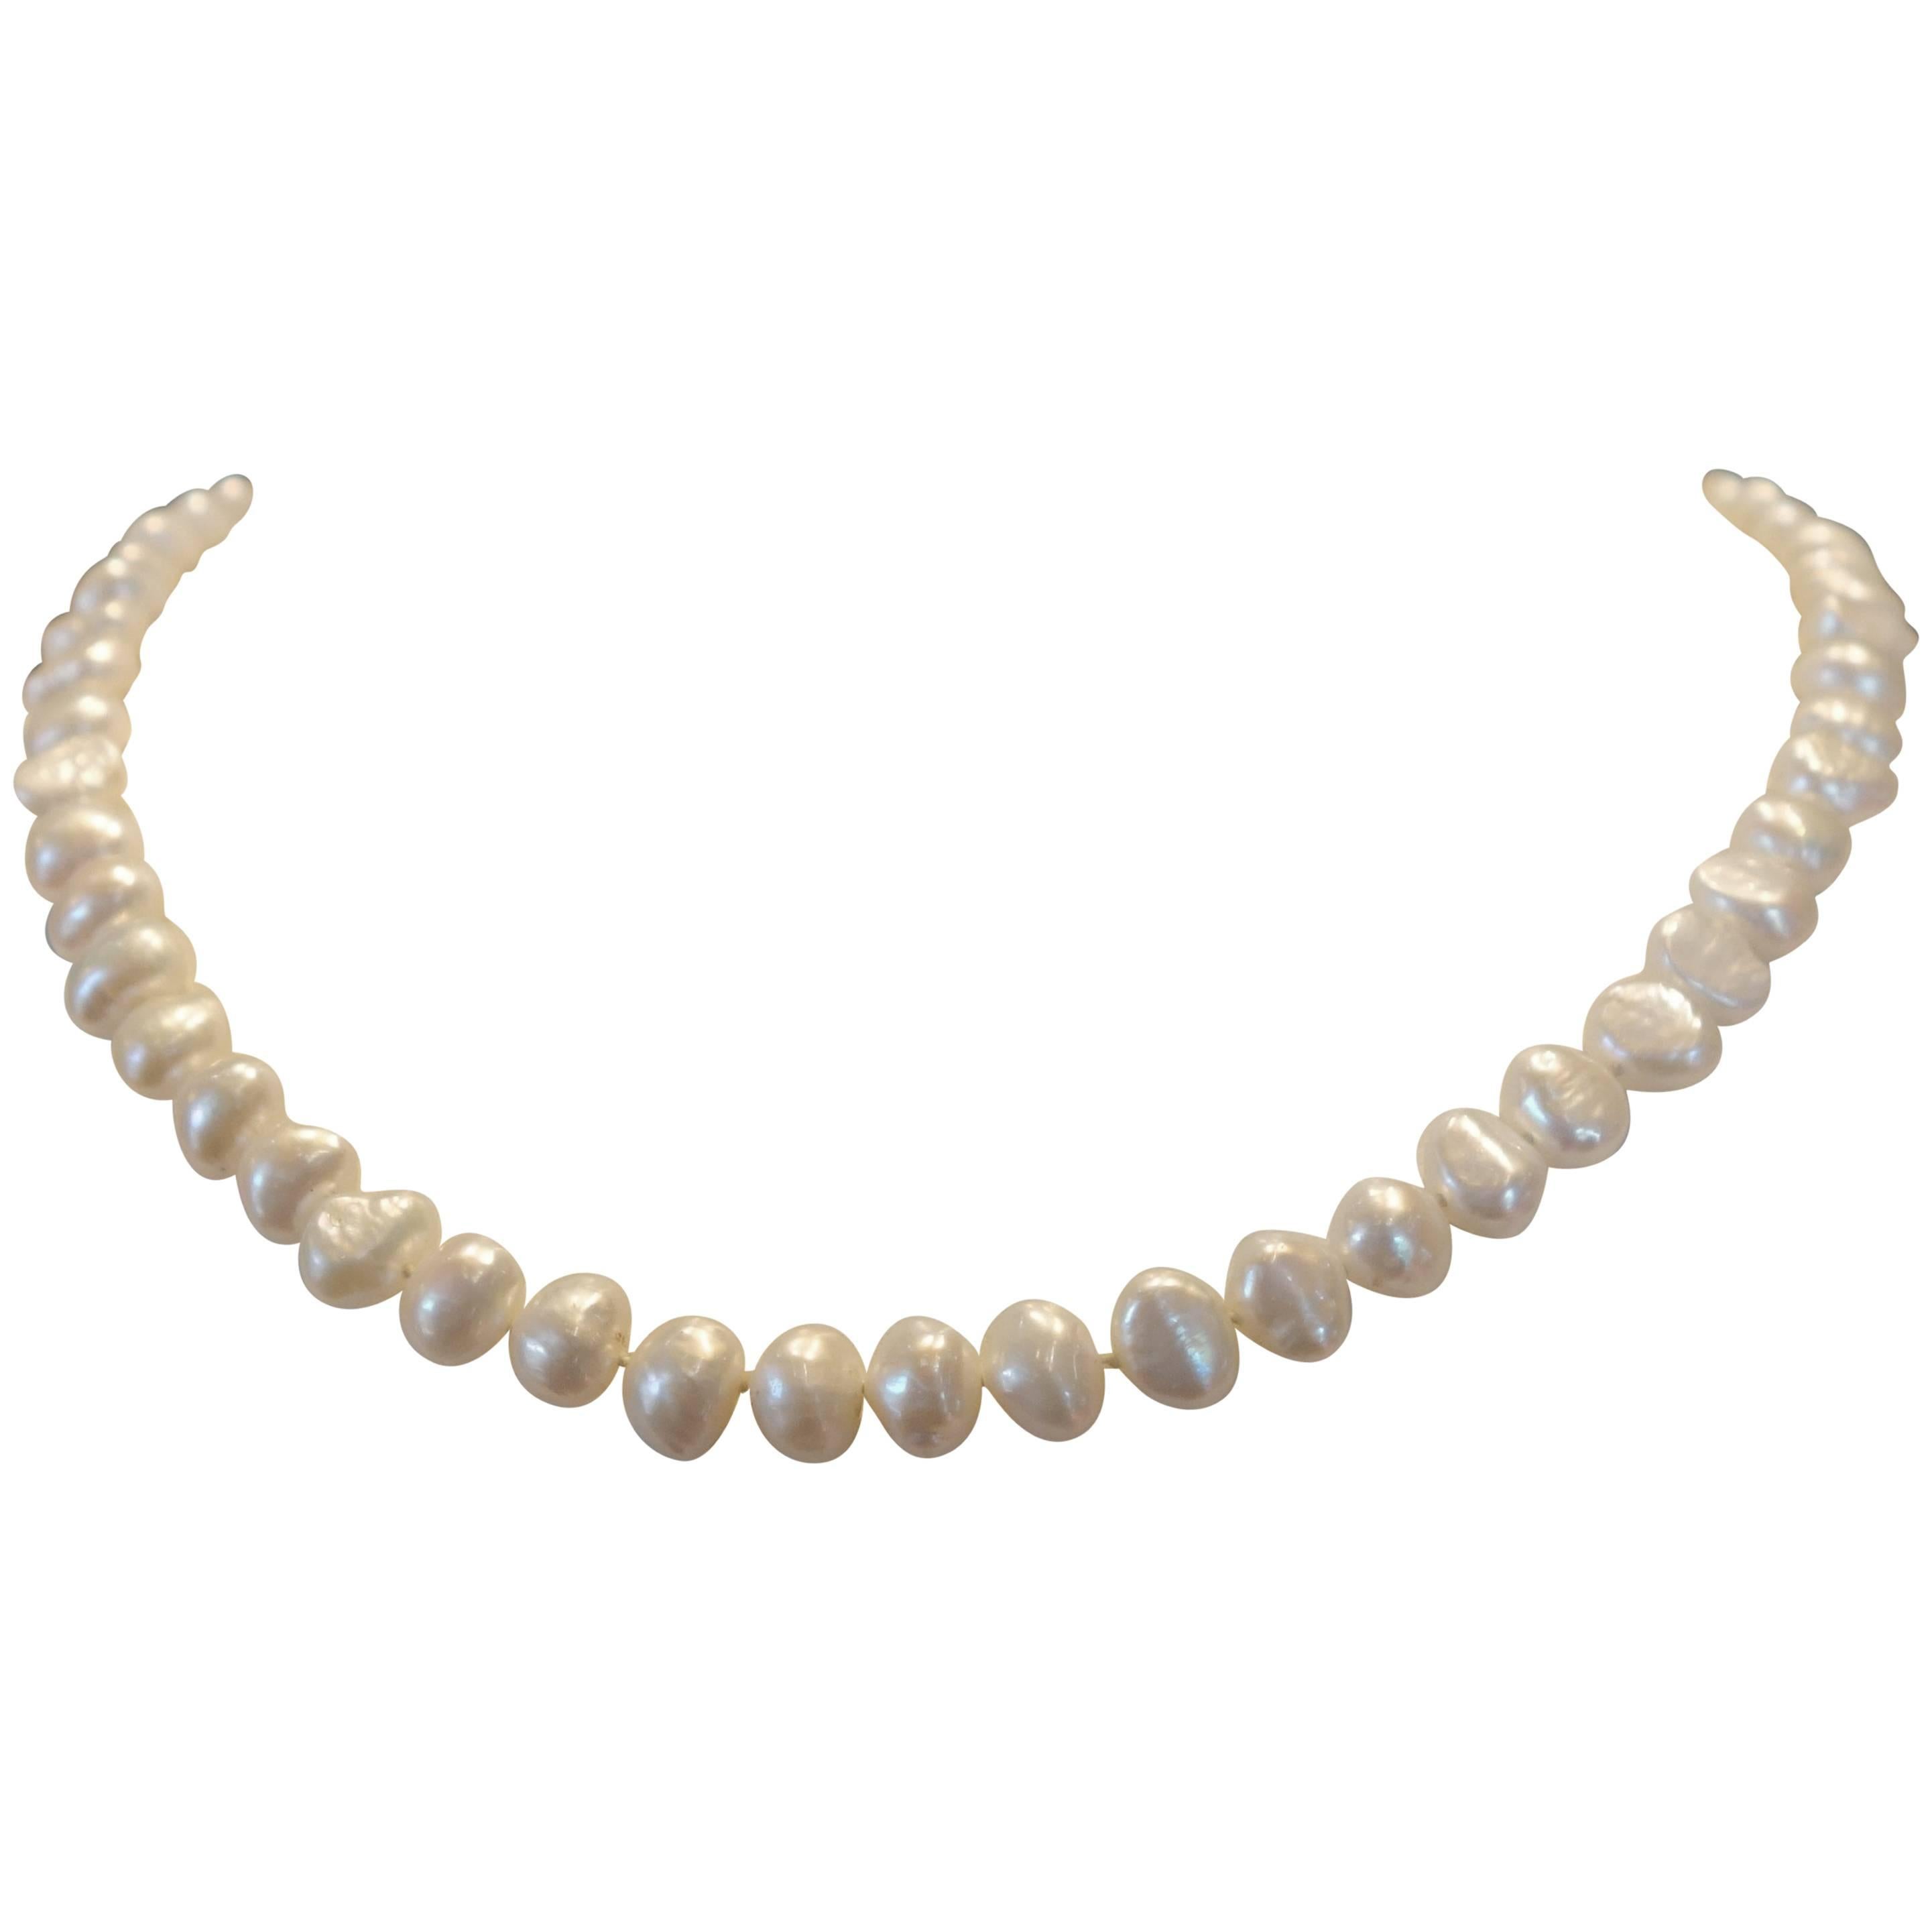 Strand of Freshwater Pearls